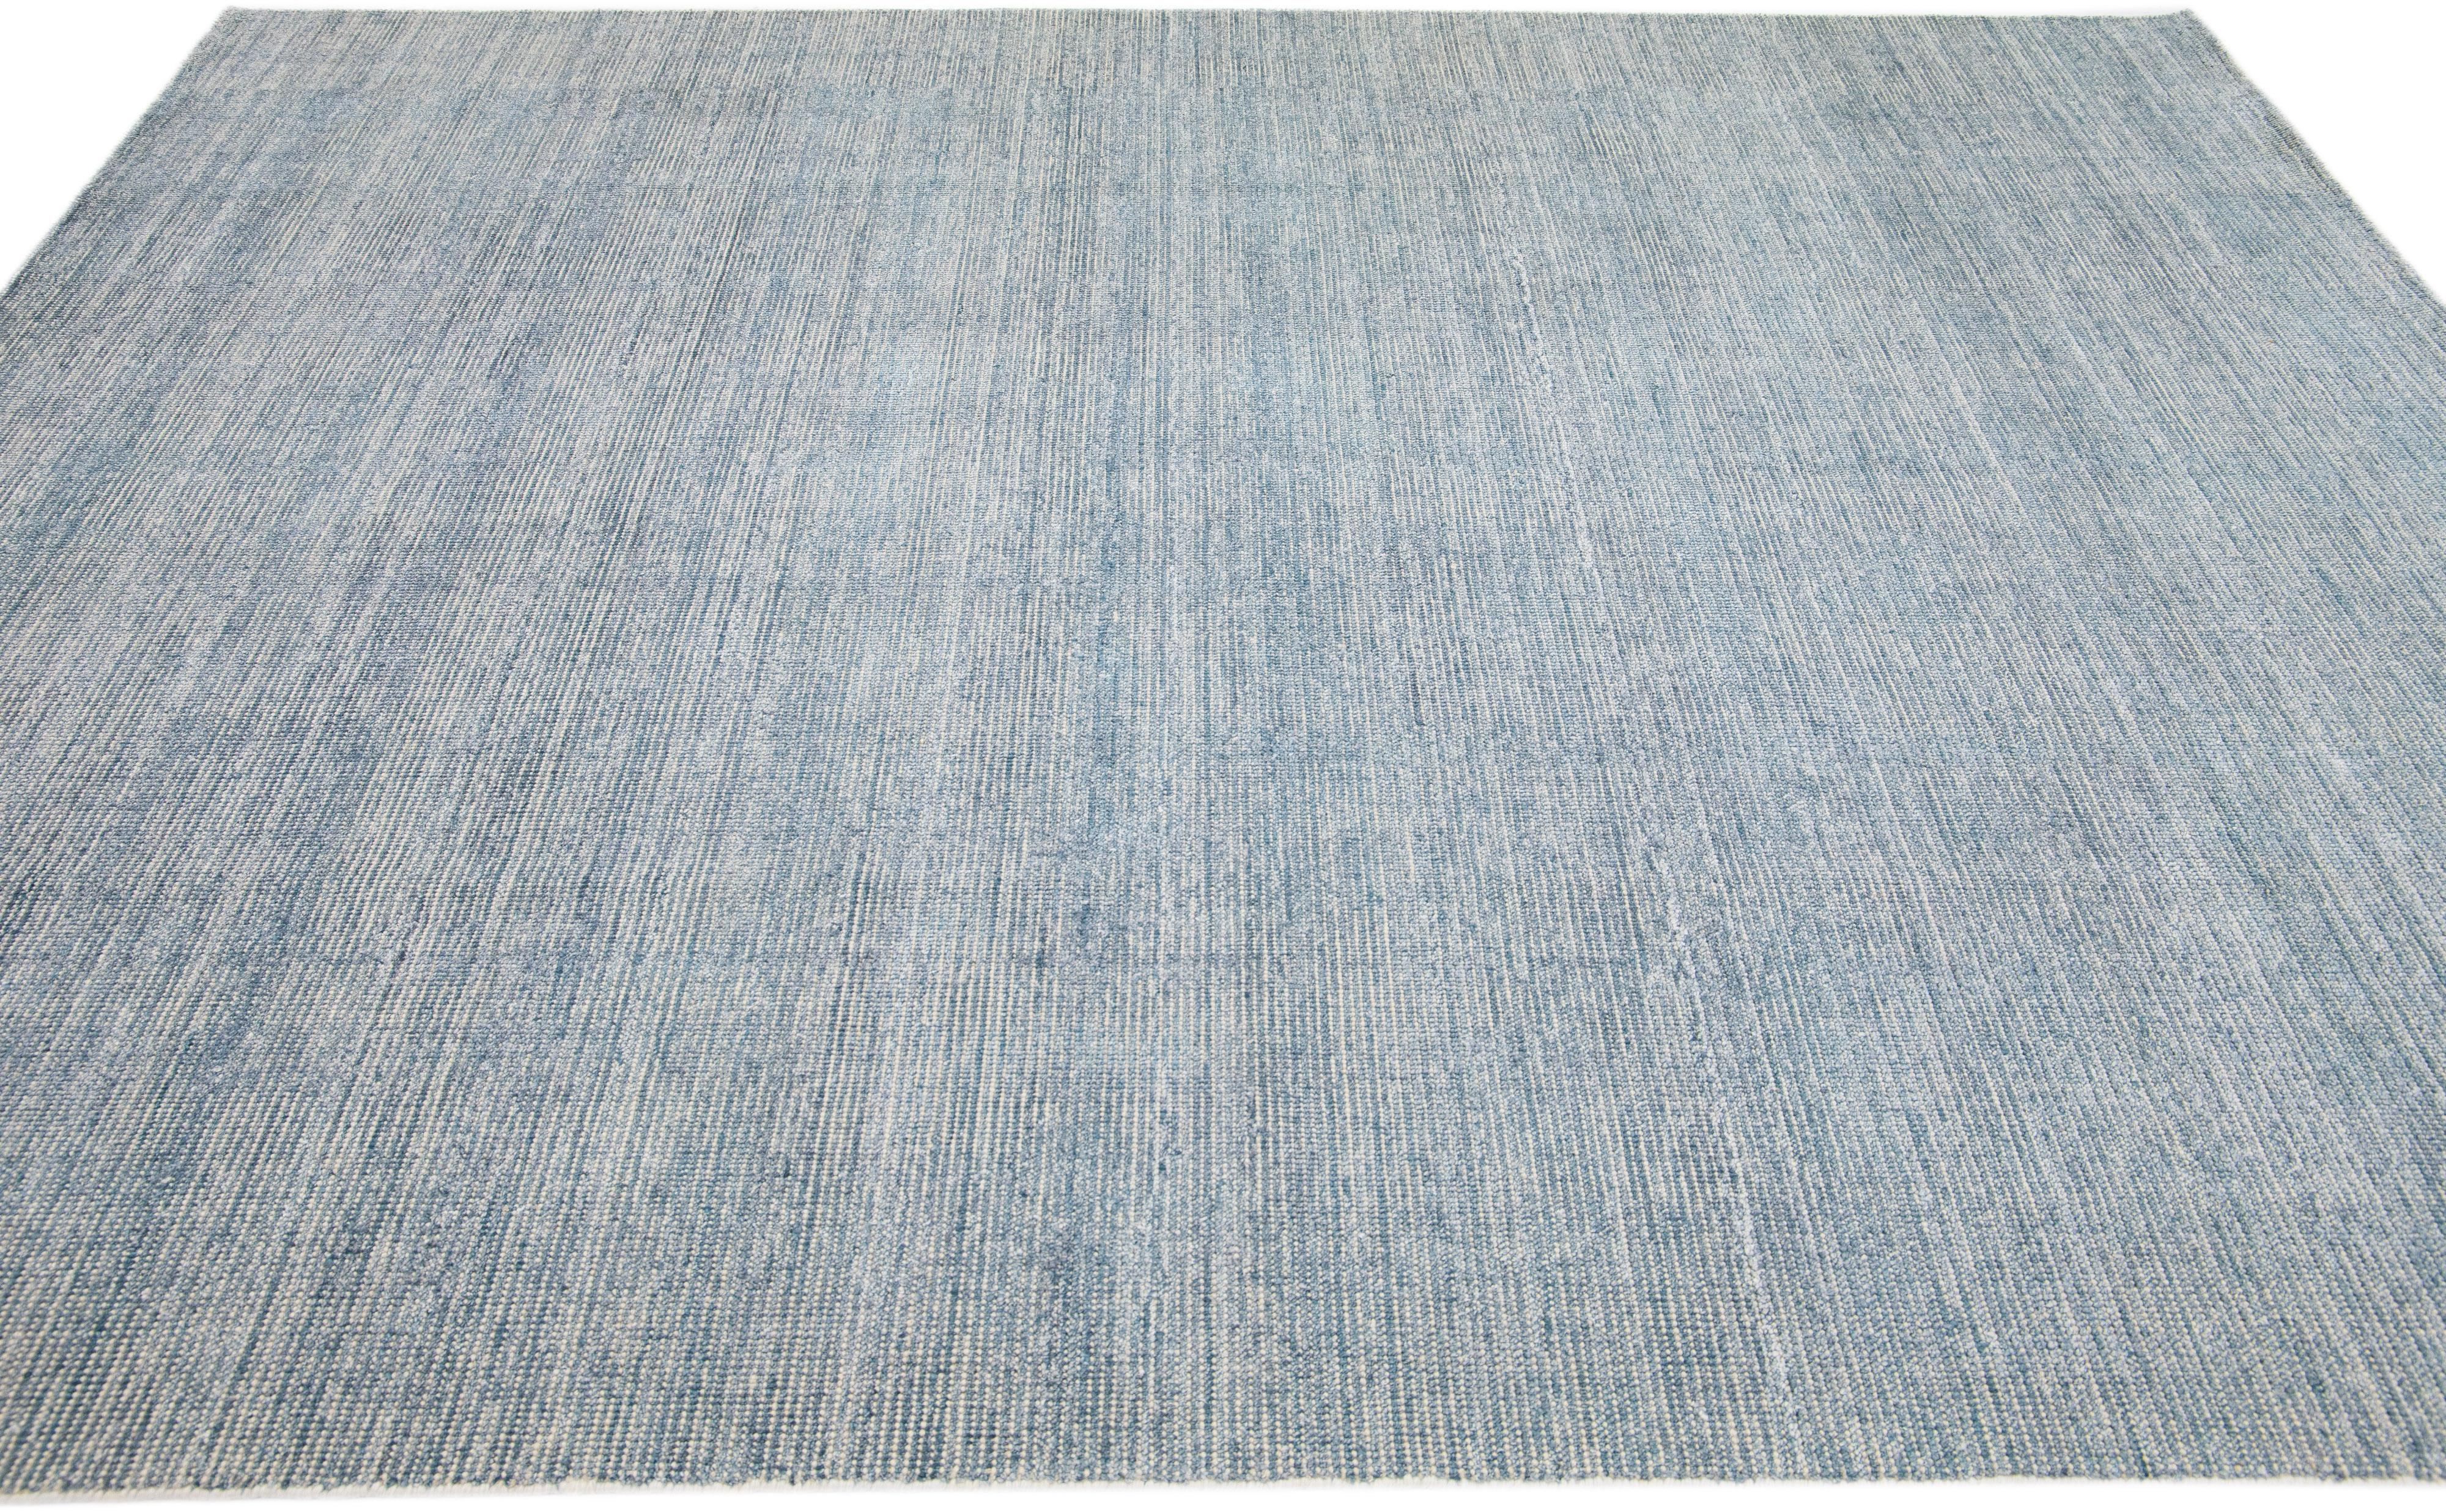 Modern Apadana's Groove Bamboo/Silk Handmade Rug in Light Blue In New Condition For Sale In Norwalk, CT